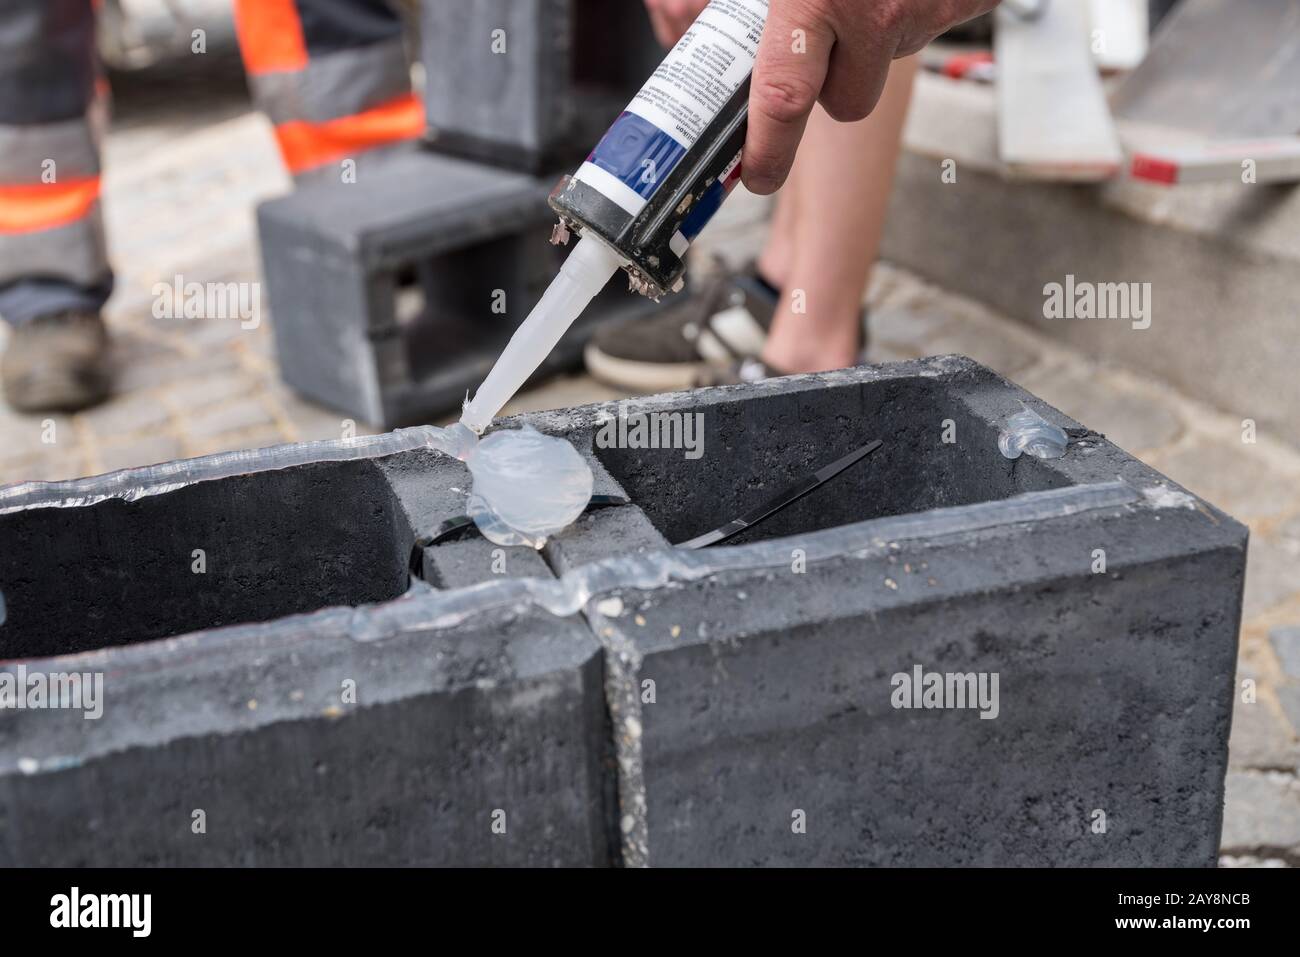 Bricklayers working with silicone and concrete bricks - close-up Stock Photo